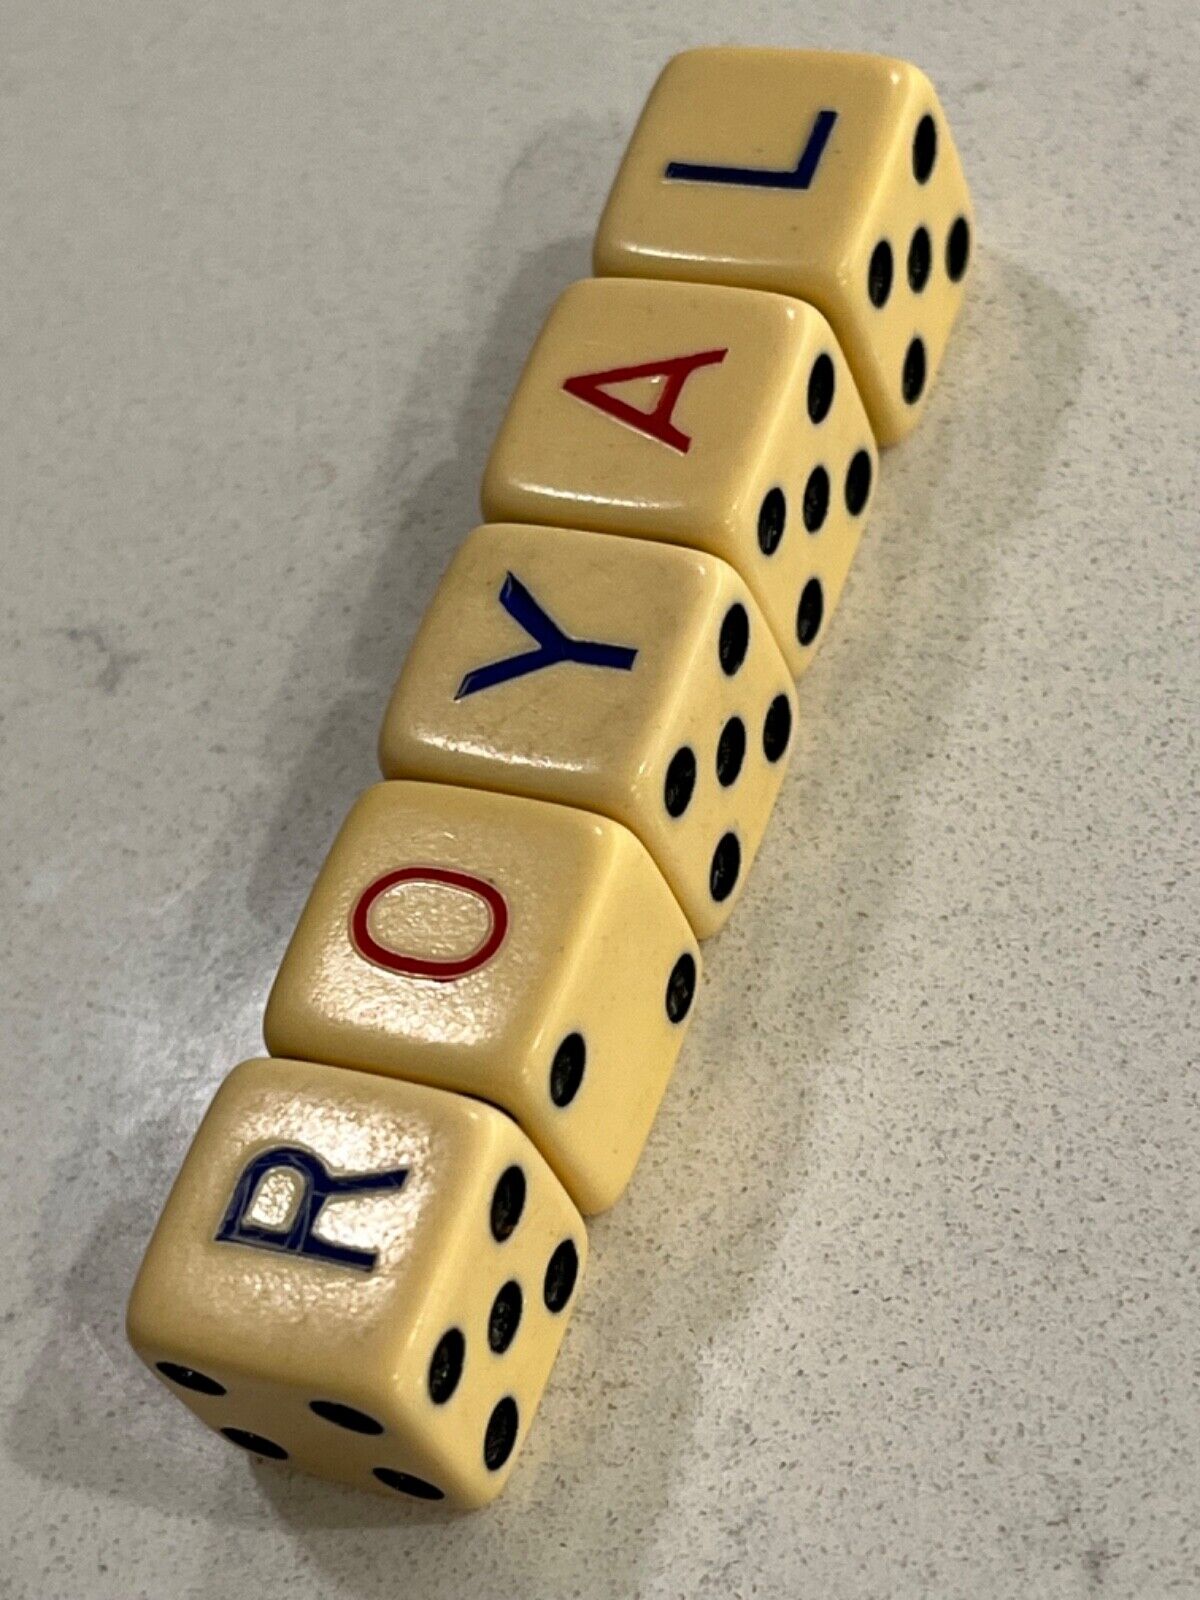 Old ivory celluloid ROYAL color etched pips 5 dice set EUROPEAN 021424@